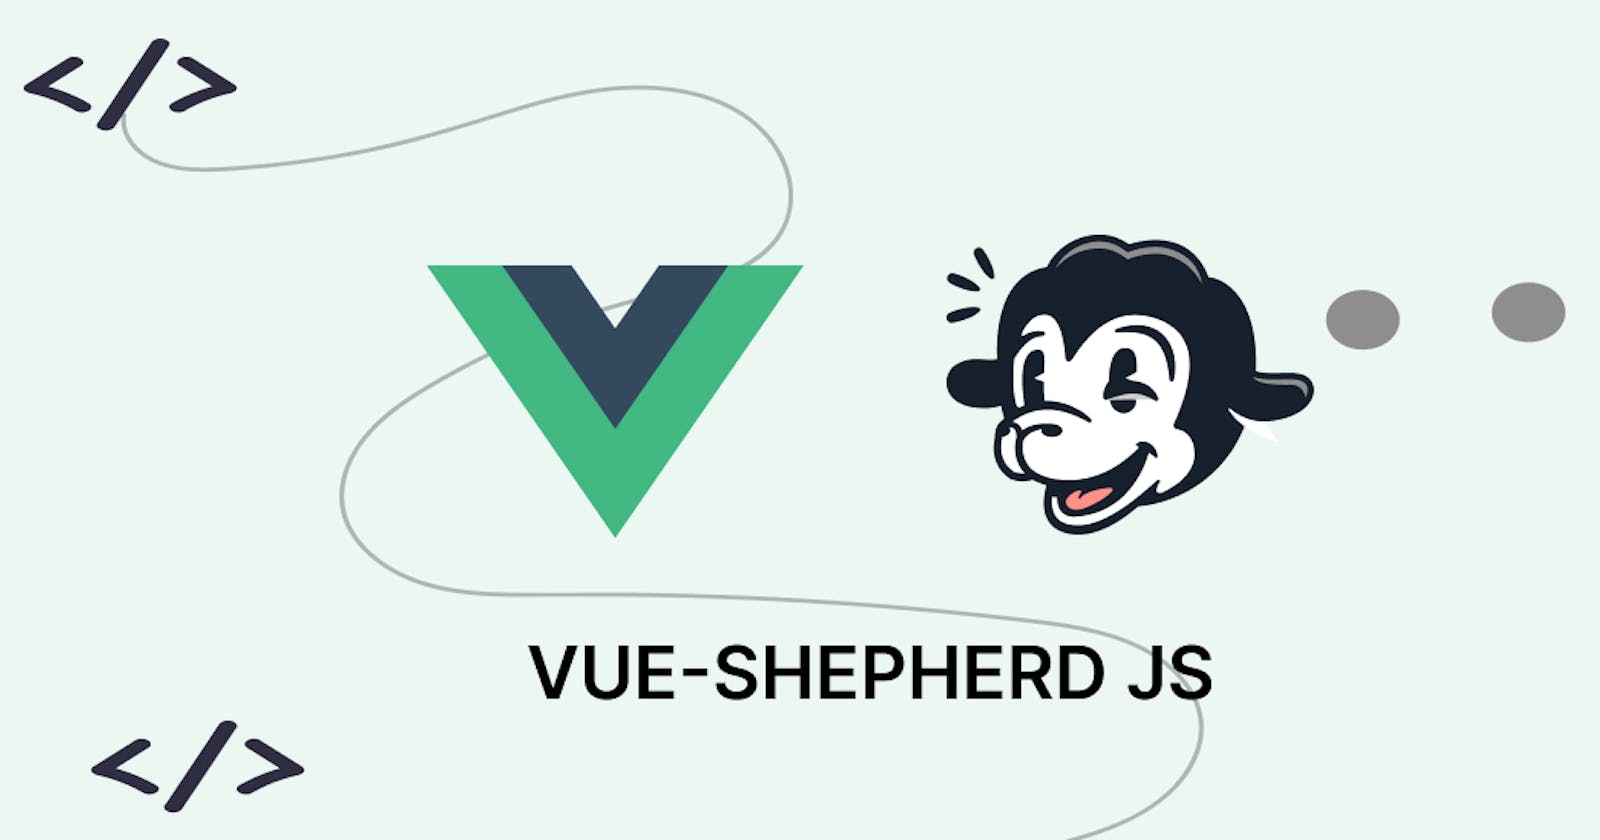 Guide to implementing Shepherd JS in vue project